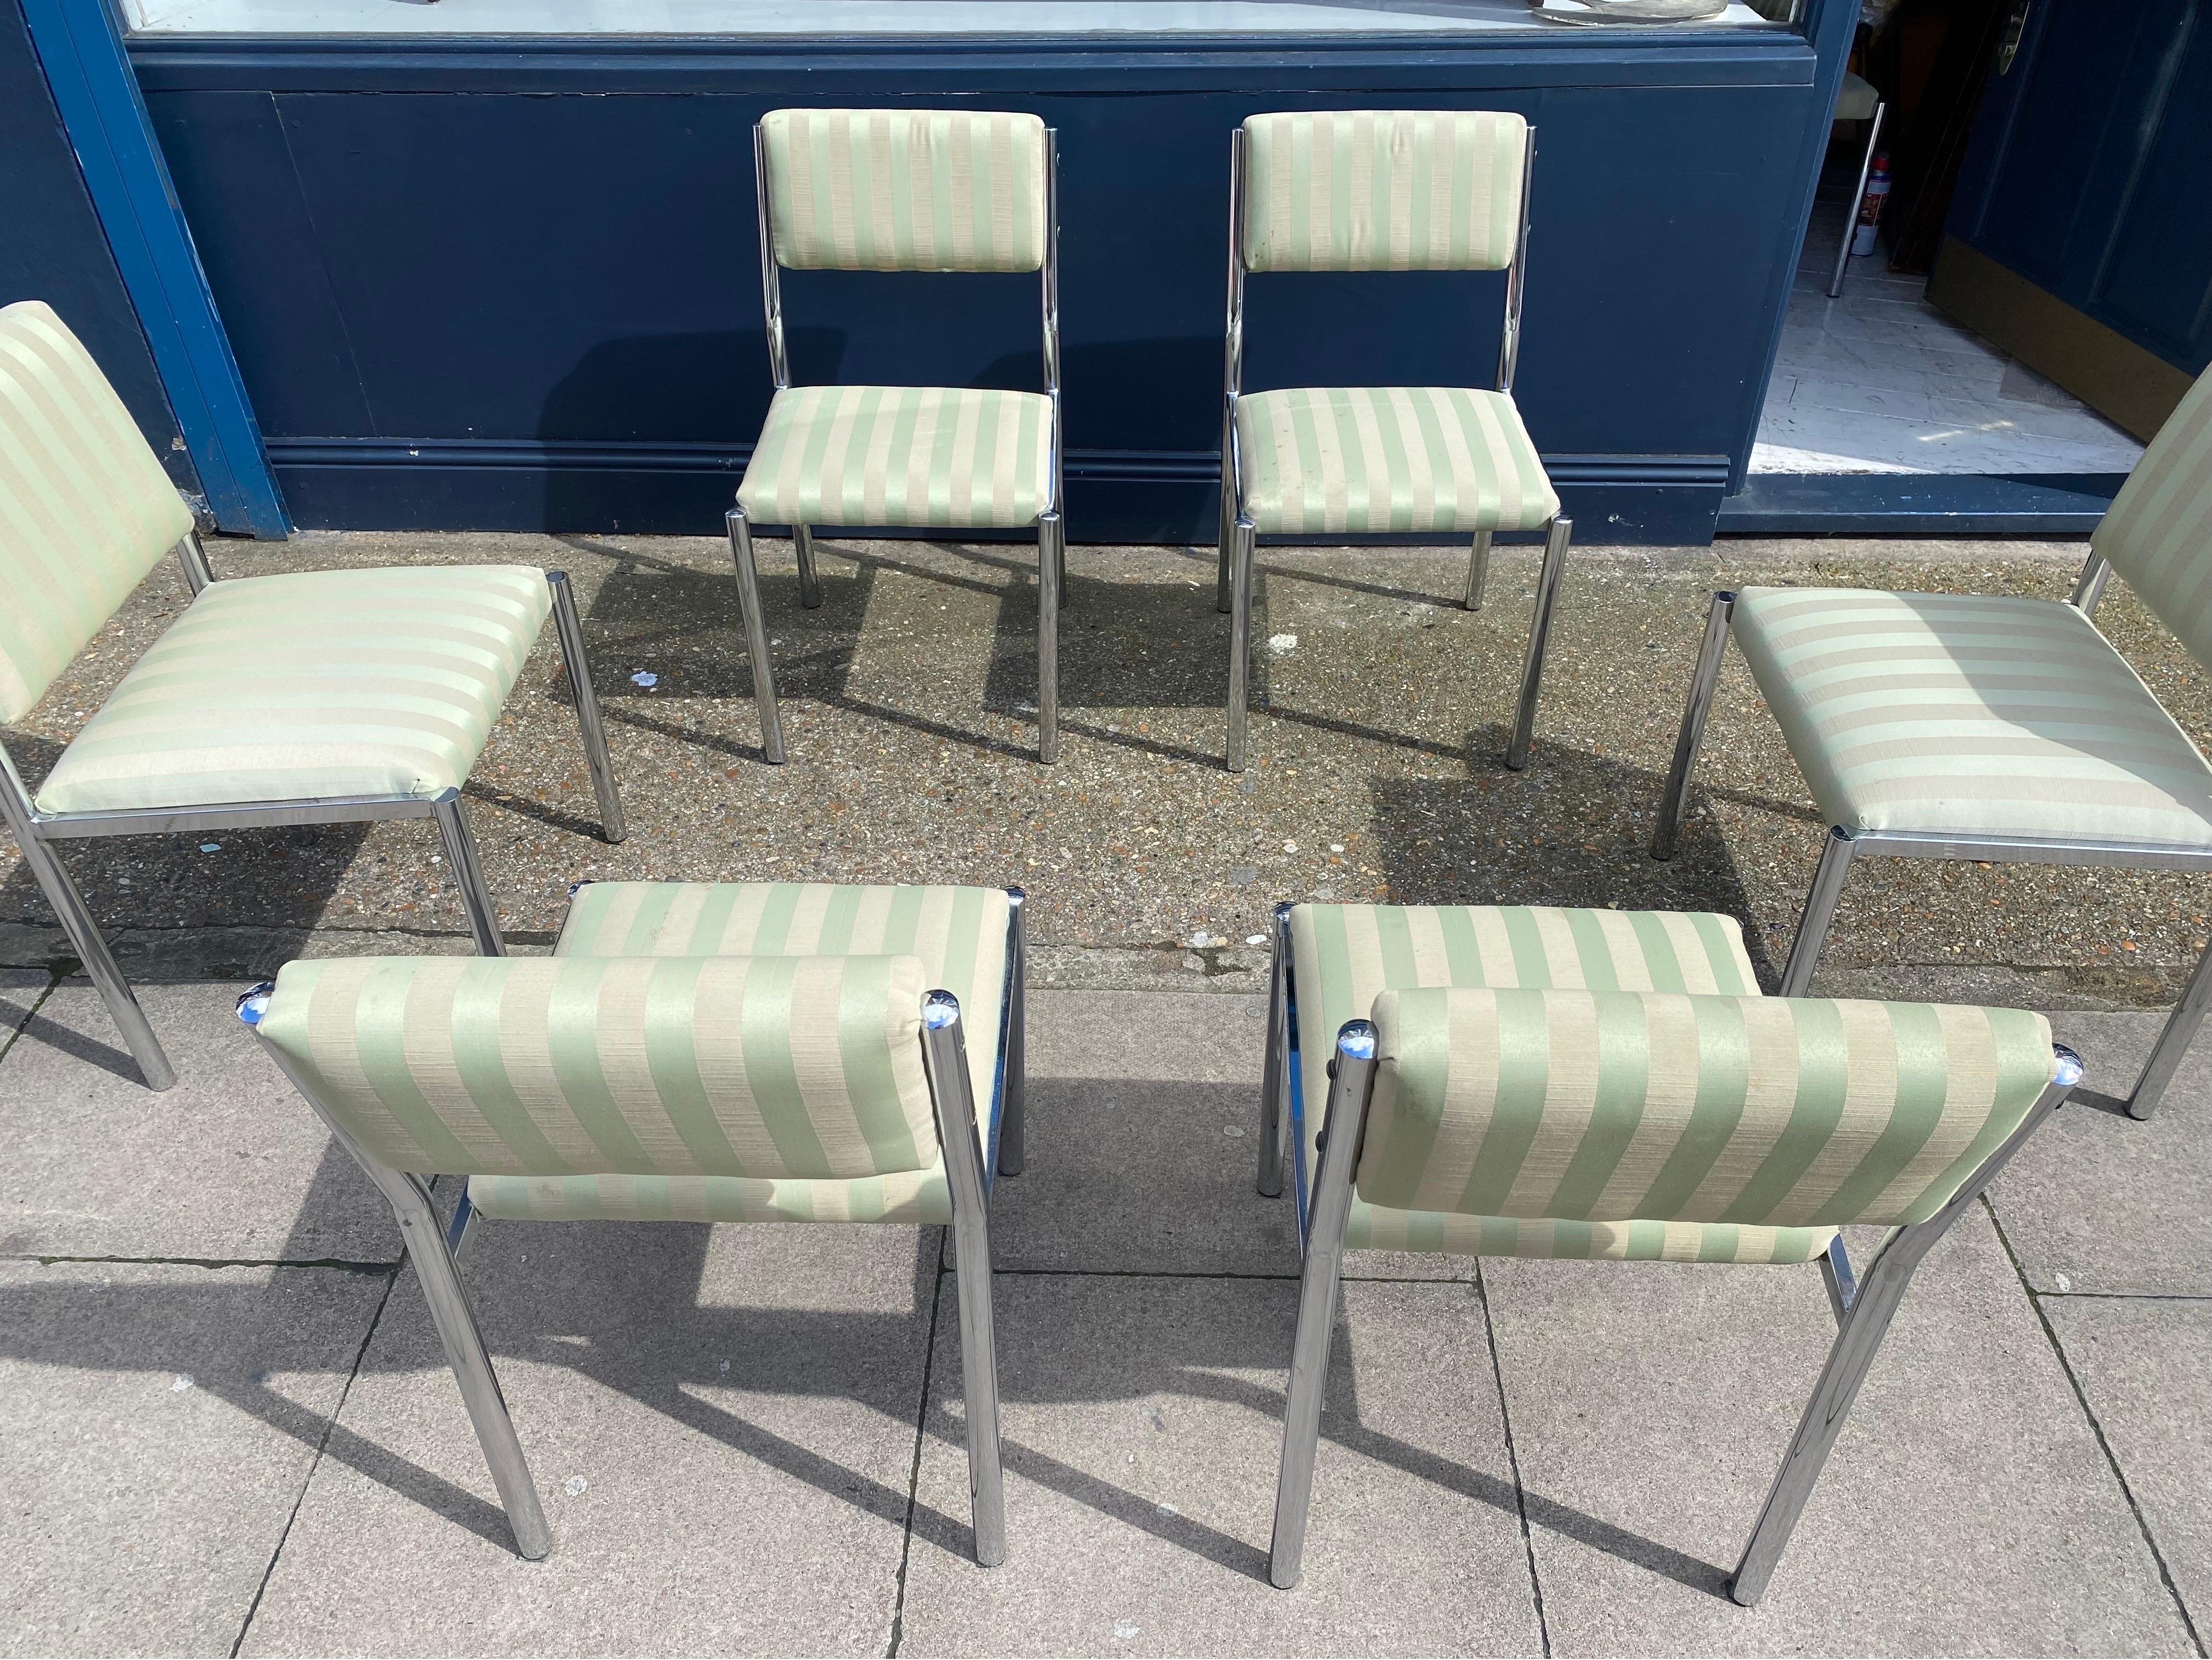 7 x Chrome Dining Chairs 1970s Hollywood Regency Modernist Vintage Table Italian For Sale 2